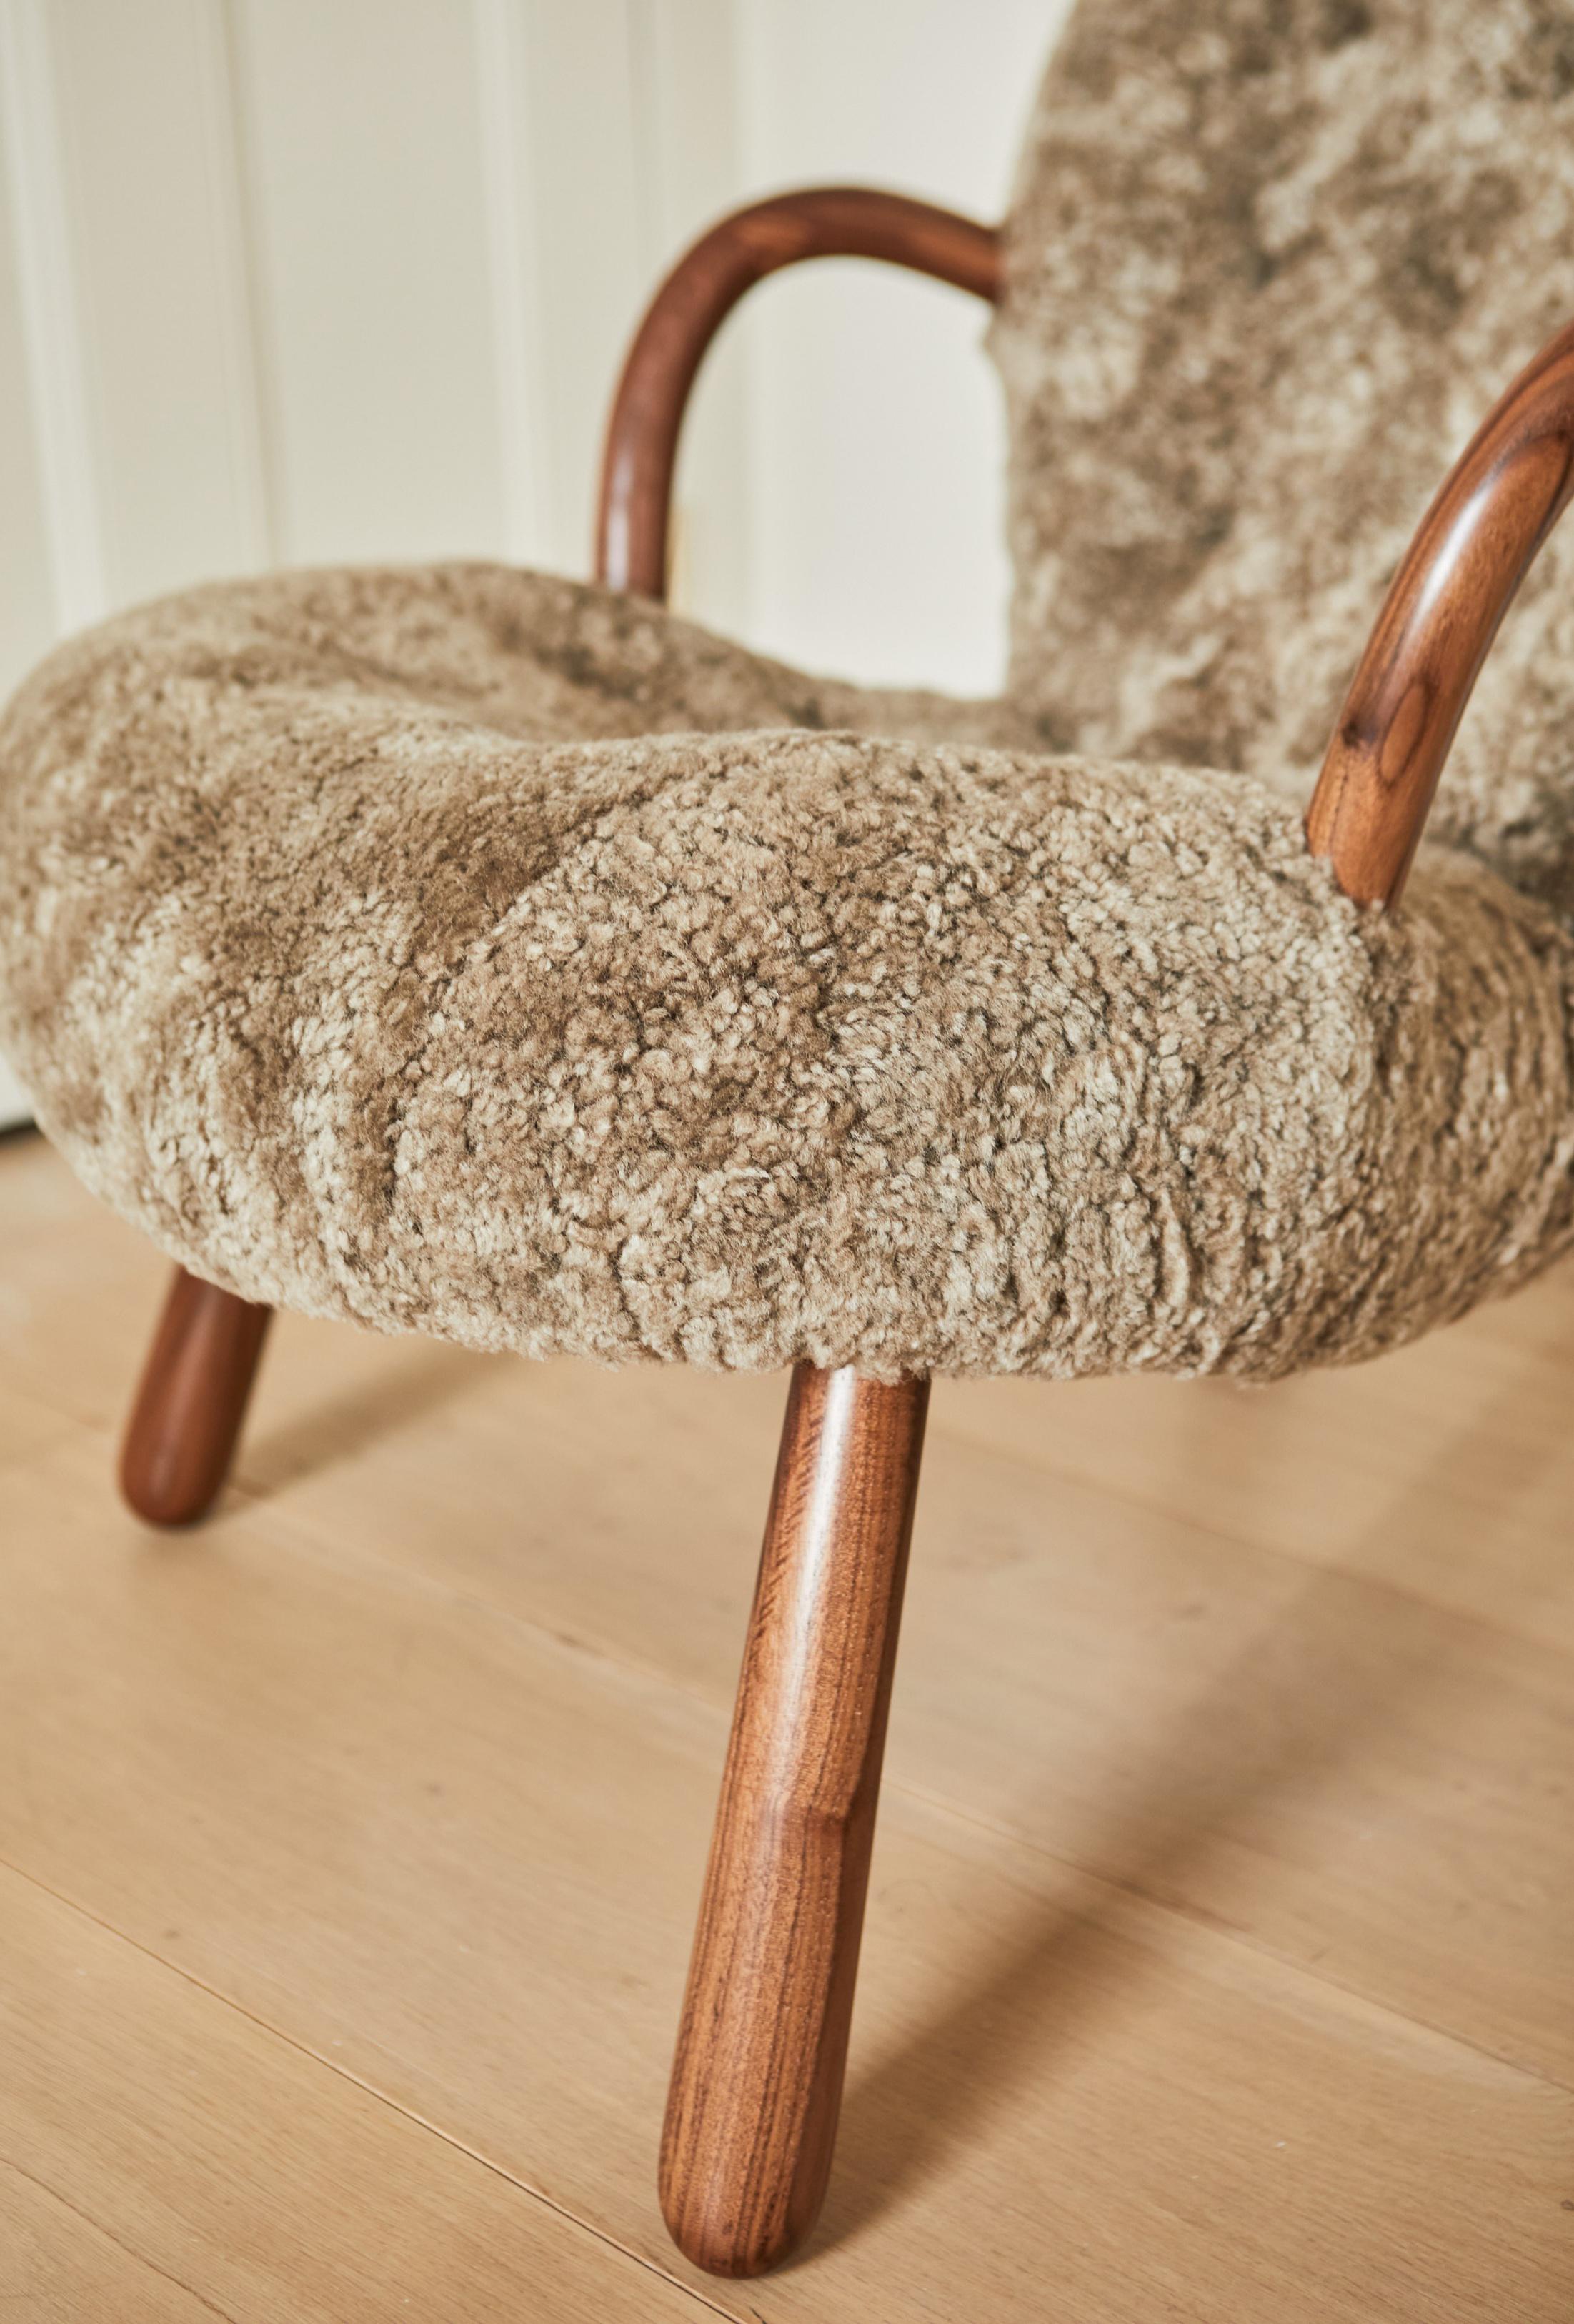 Re-Edition Sheepskin Clam Chair by Arnold Madsen For Sale 6